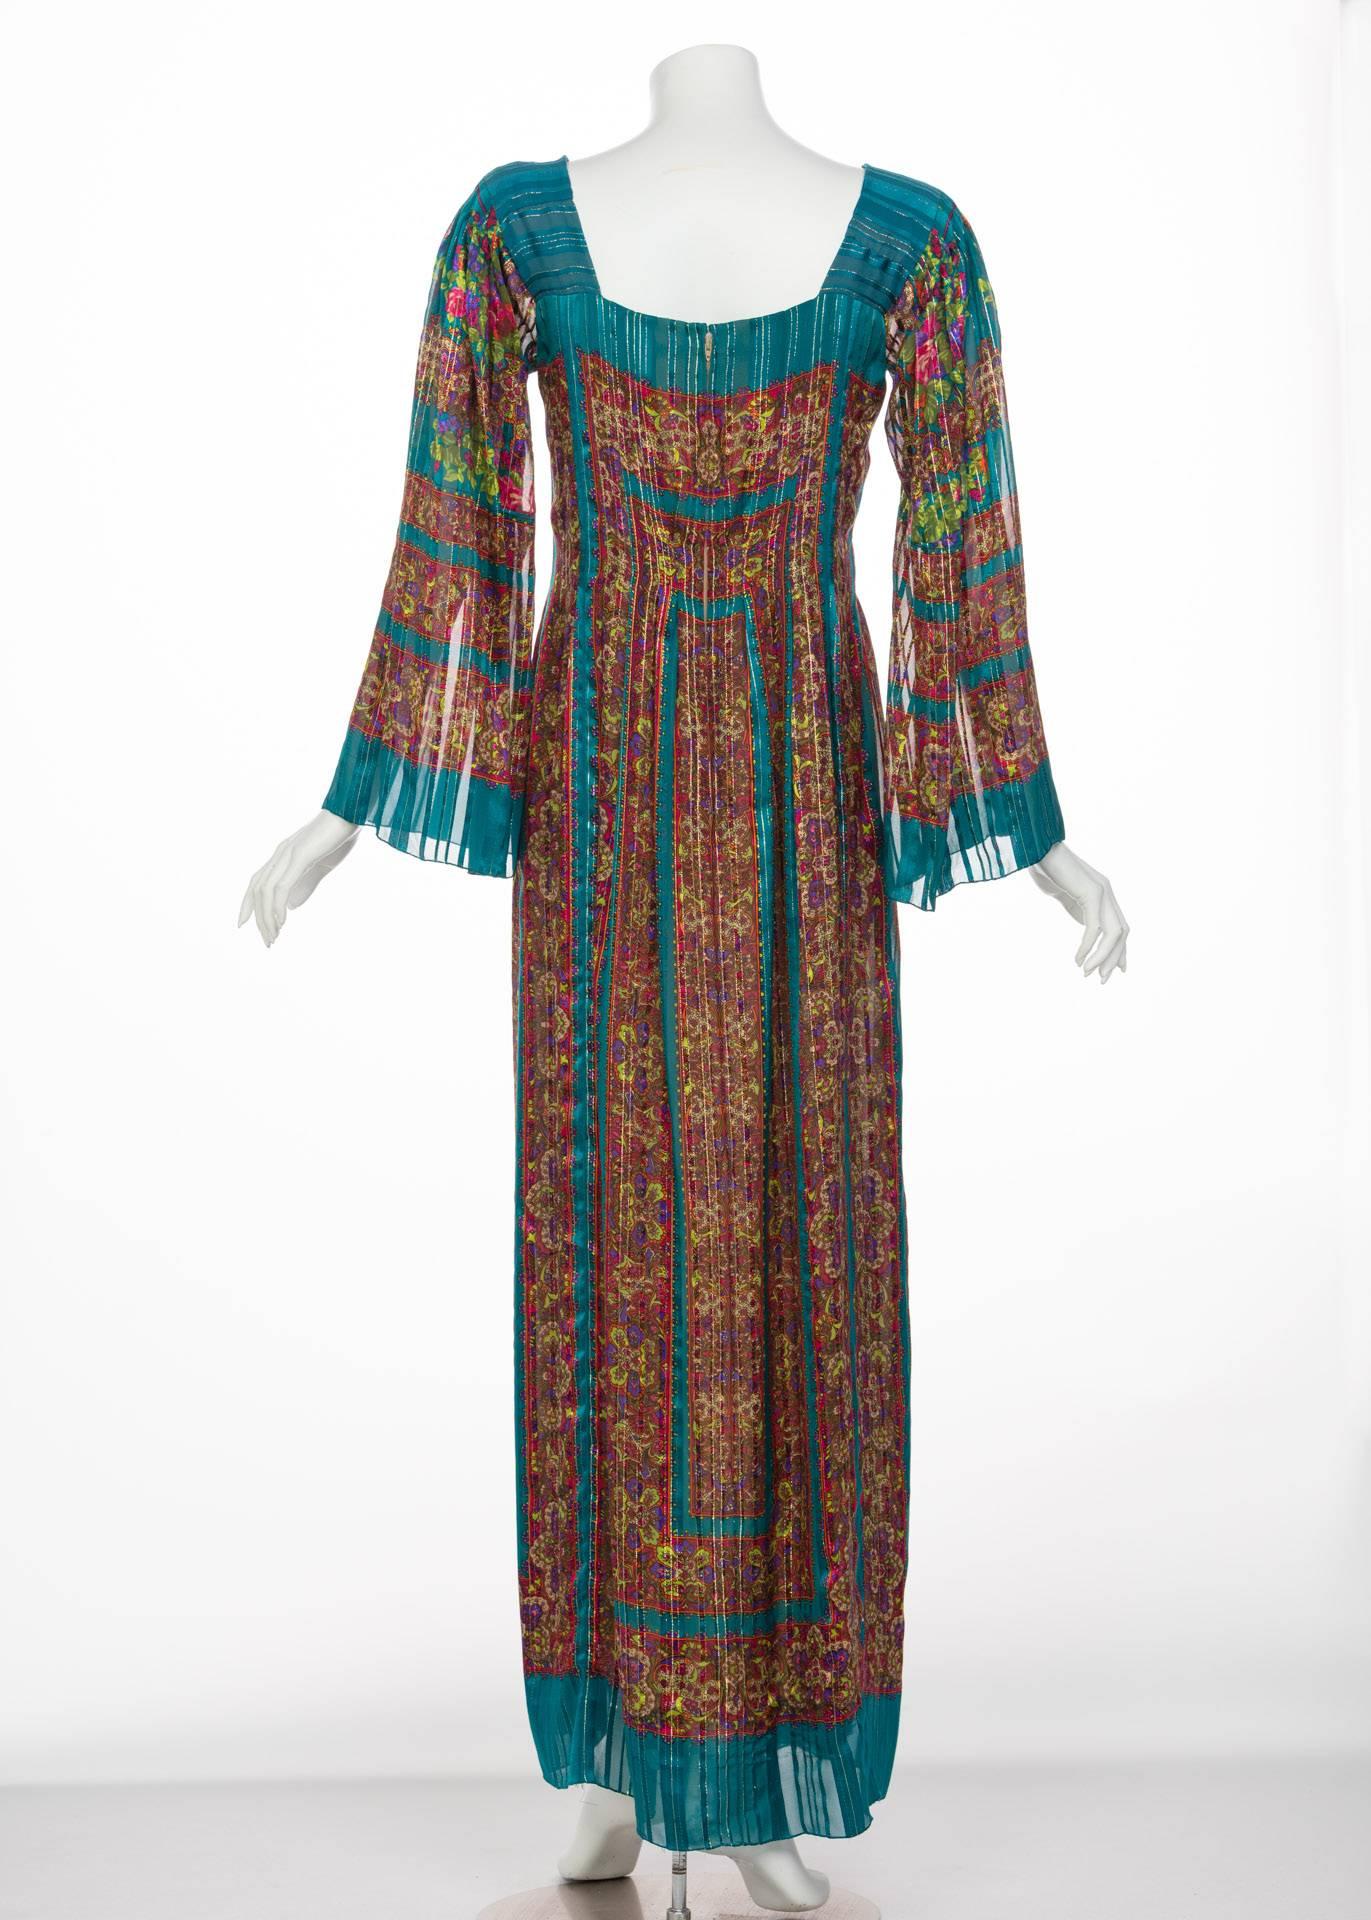 Pauline Trigere Silk Floral Metallic Bell Sleeve Caftan Maxi Dress, 1970s In Excellent Condition For Sale In Boca Raton, FL